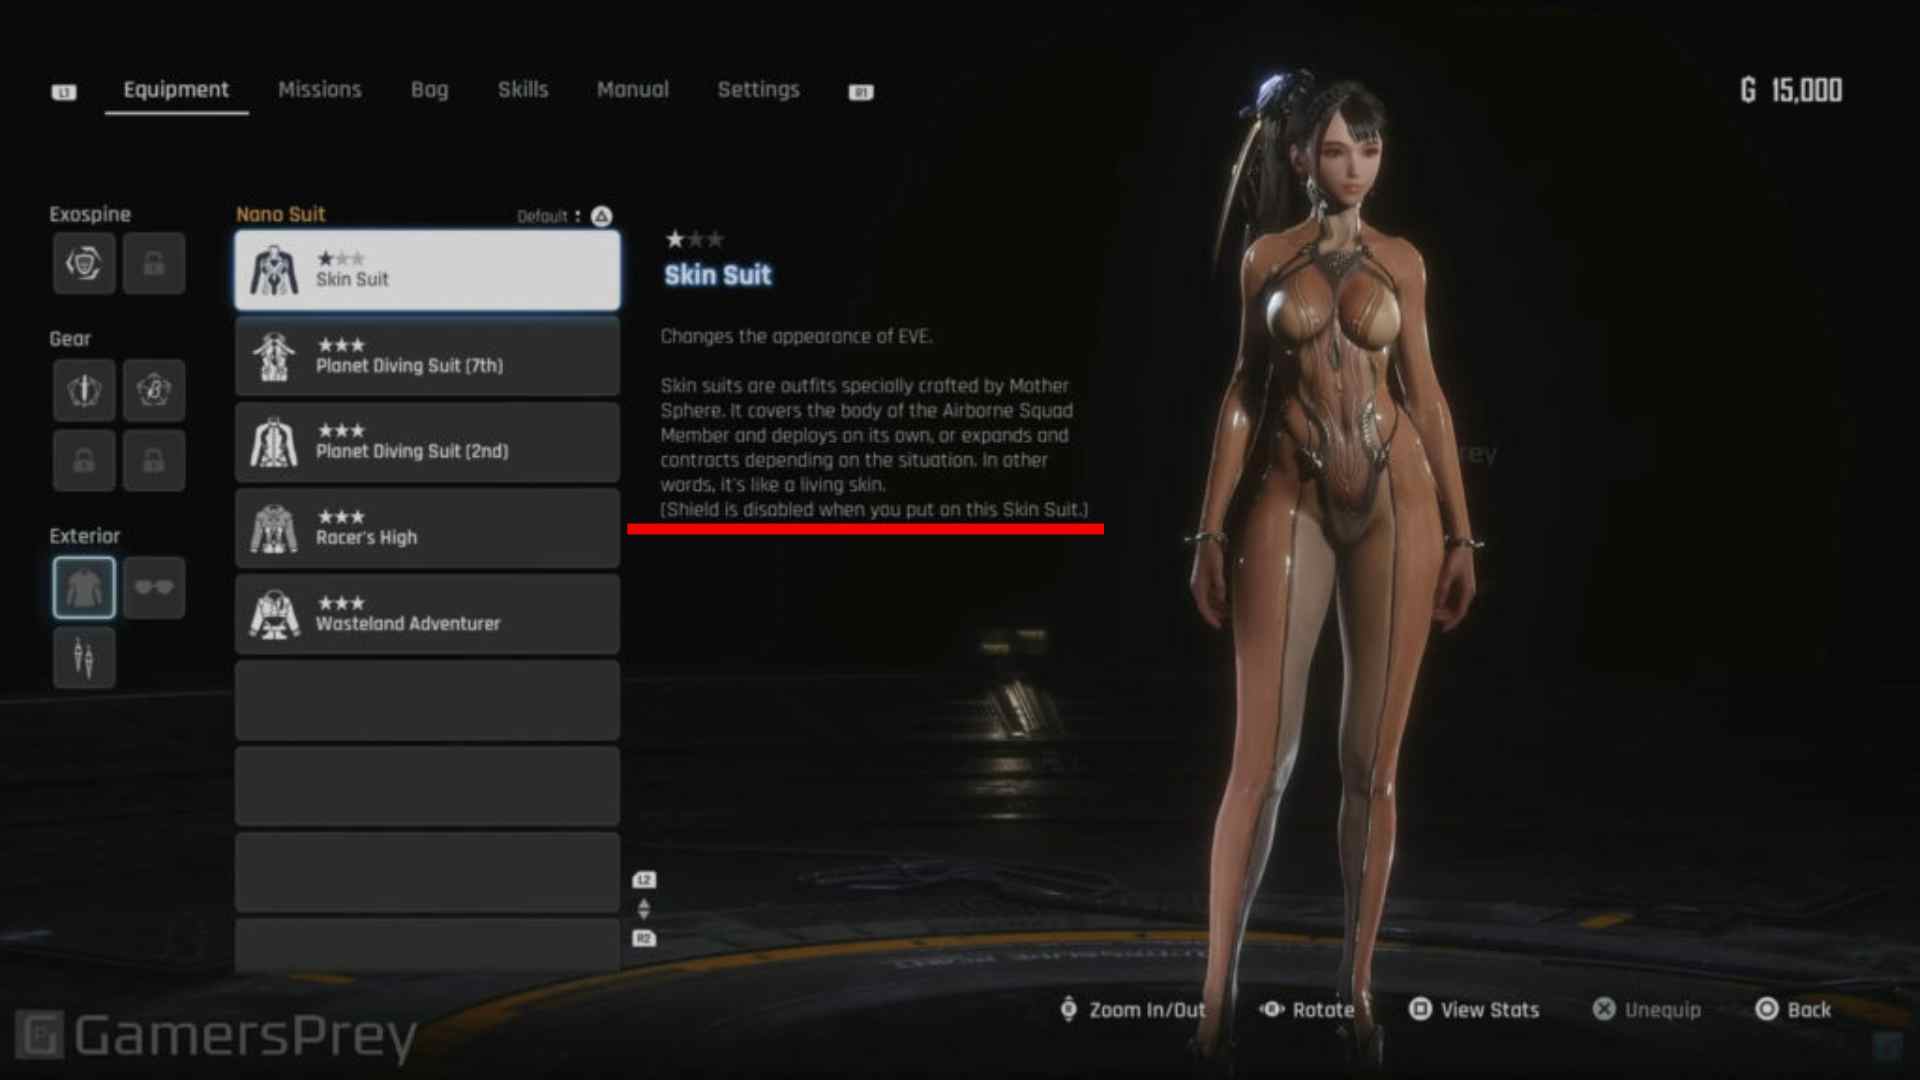 The Skin Suit will impact gameplay by disabling shields.